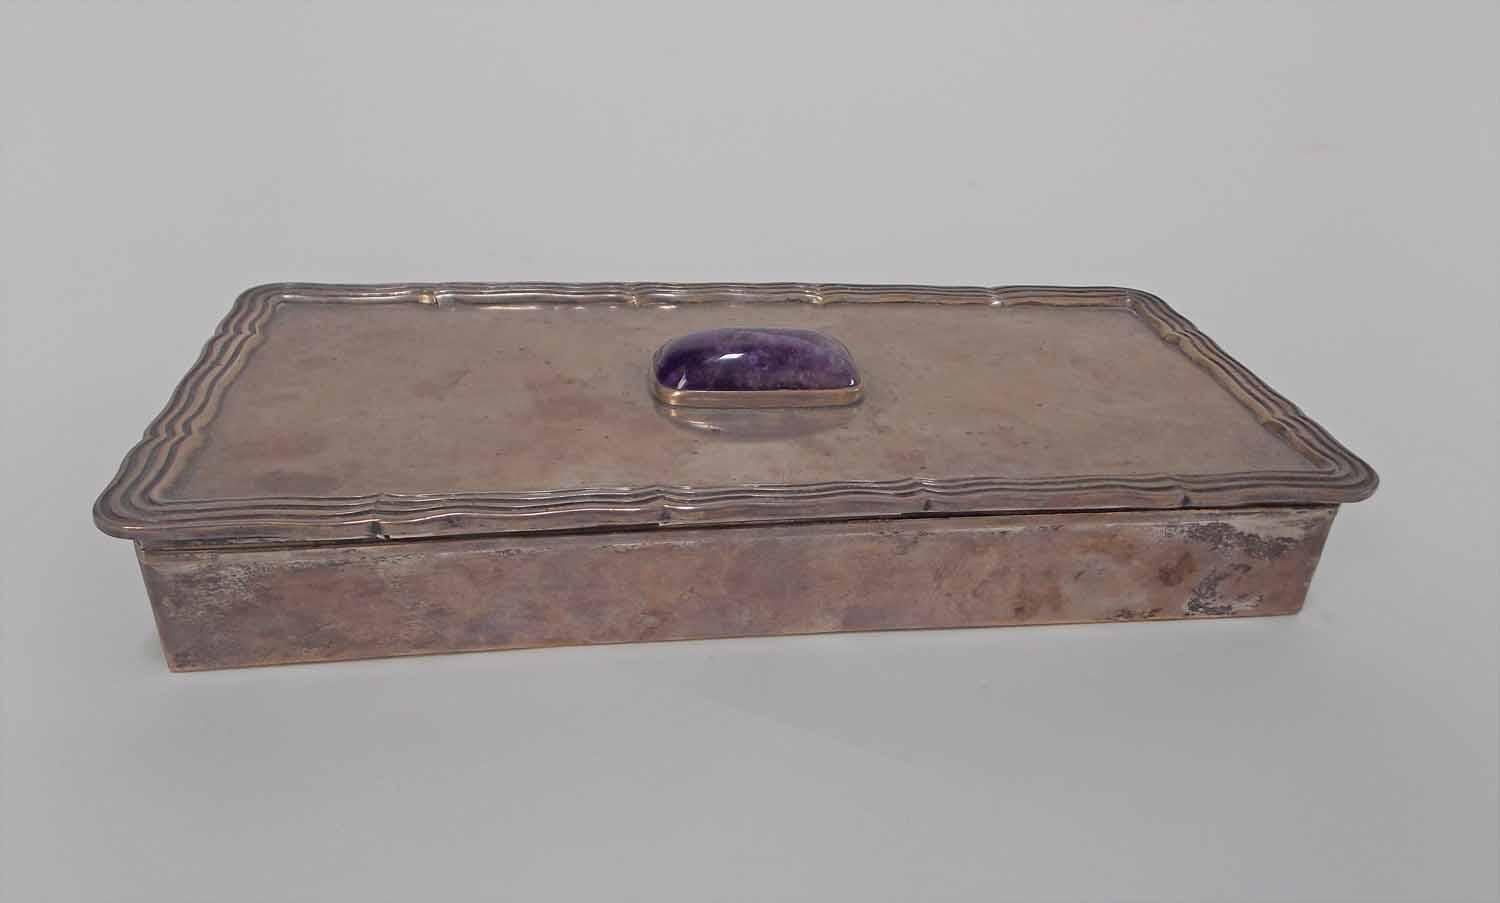 A Silver and Amethyst box 
Carved and mounted with an Amethyst Cabochon.
Wood interior
Stamped signature.
 